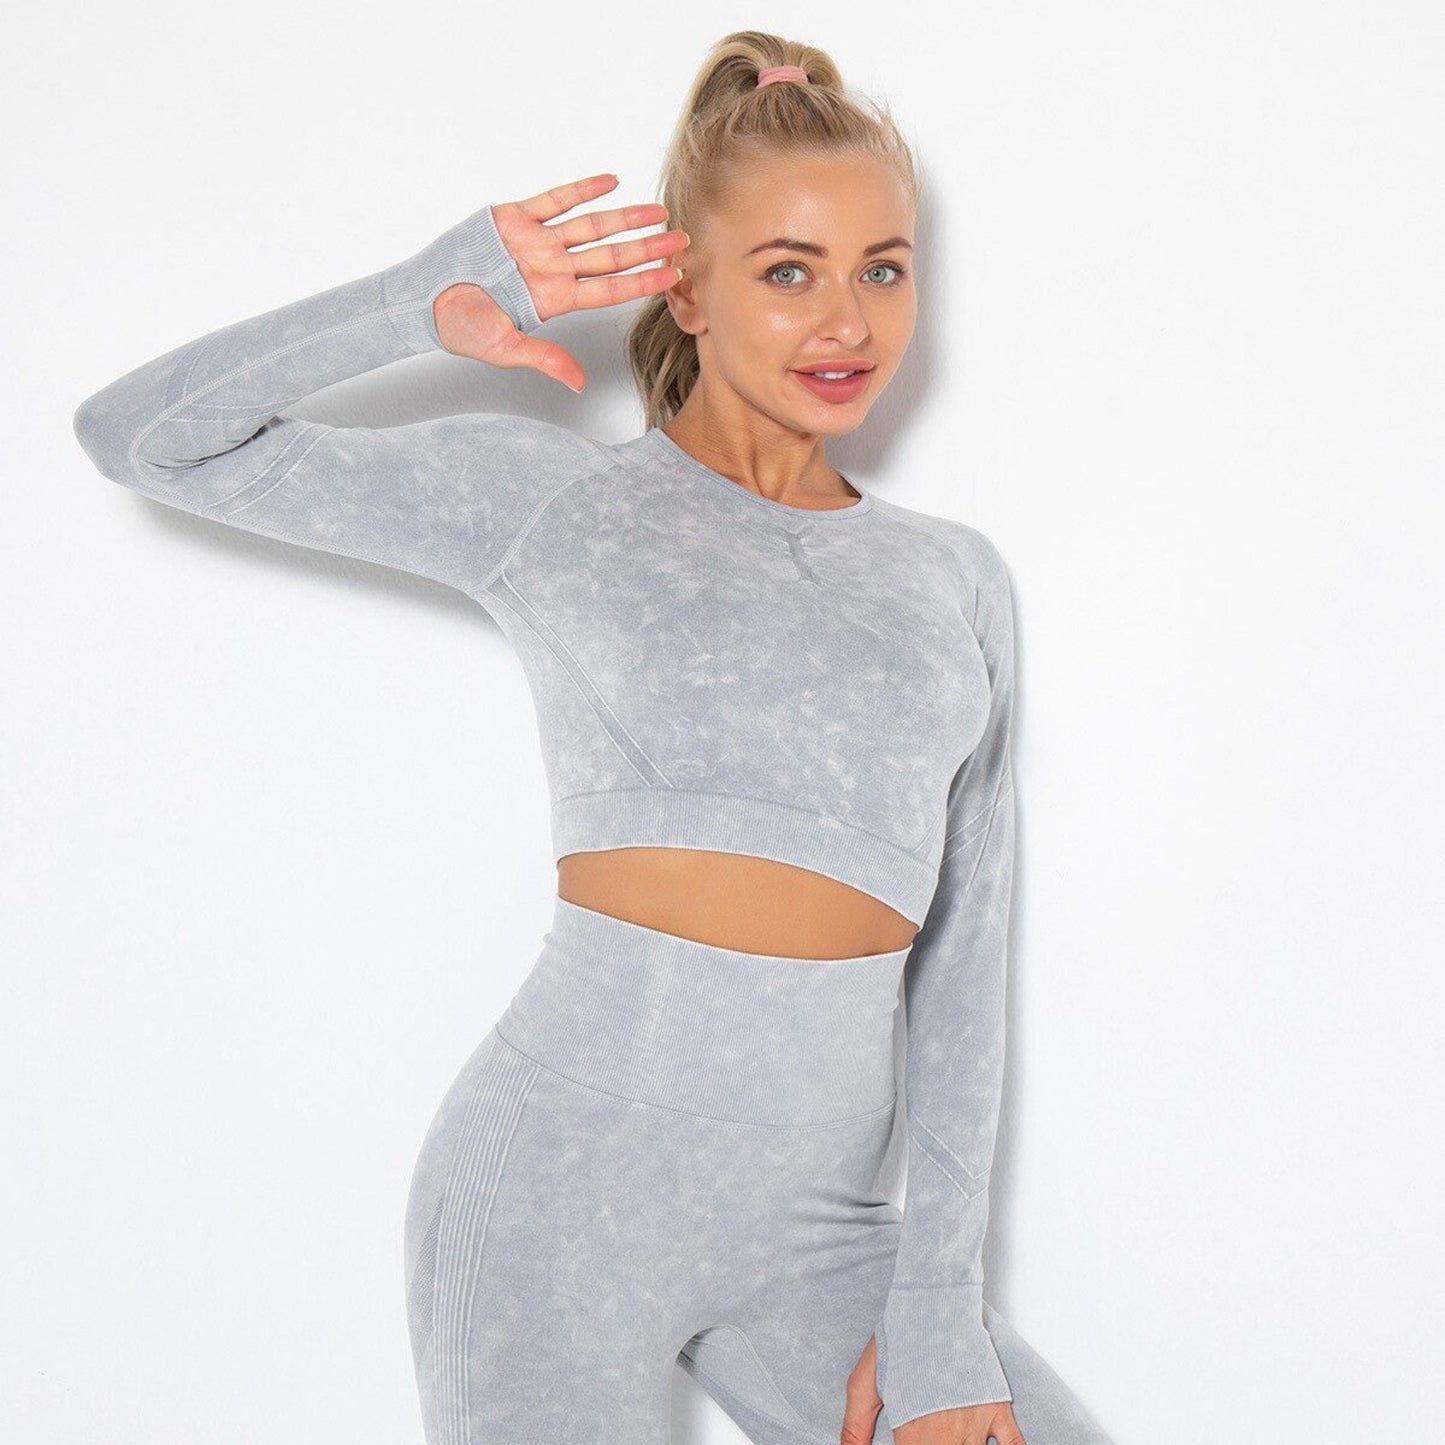 FITNESS MODEL STRETCHING IN ARIA WORKOUT CROP TOP  IN GREY  FEATURING THUMBHOLES ON SLEEVES, FROM VIBRAS ACTIVEWEAR.